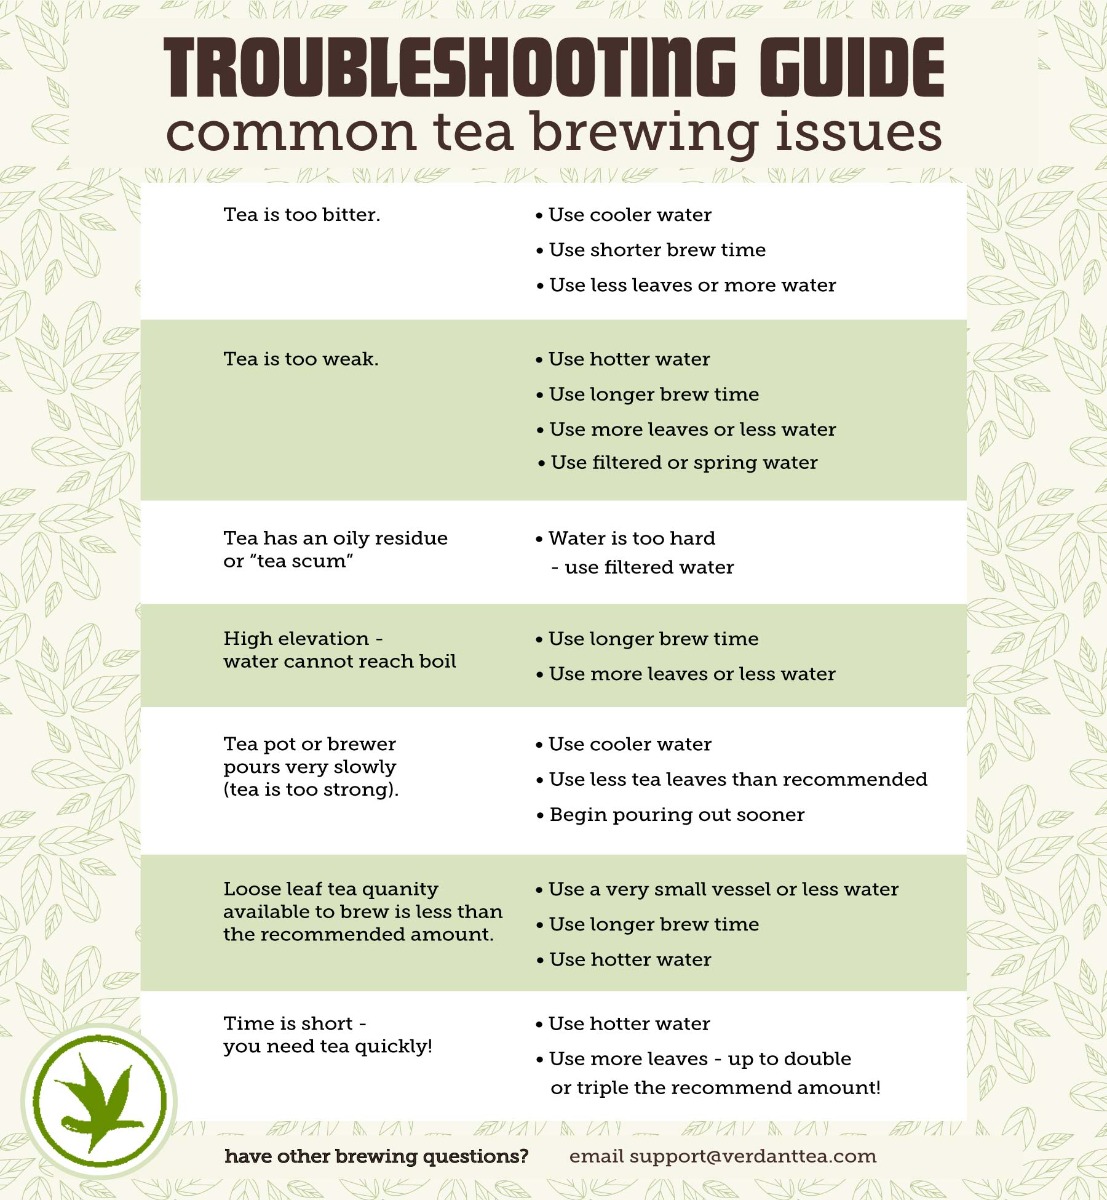 Common Tea Brewing Issues: Troubleshooting Guide